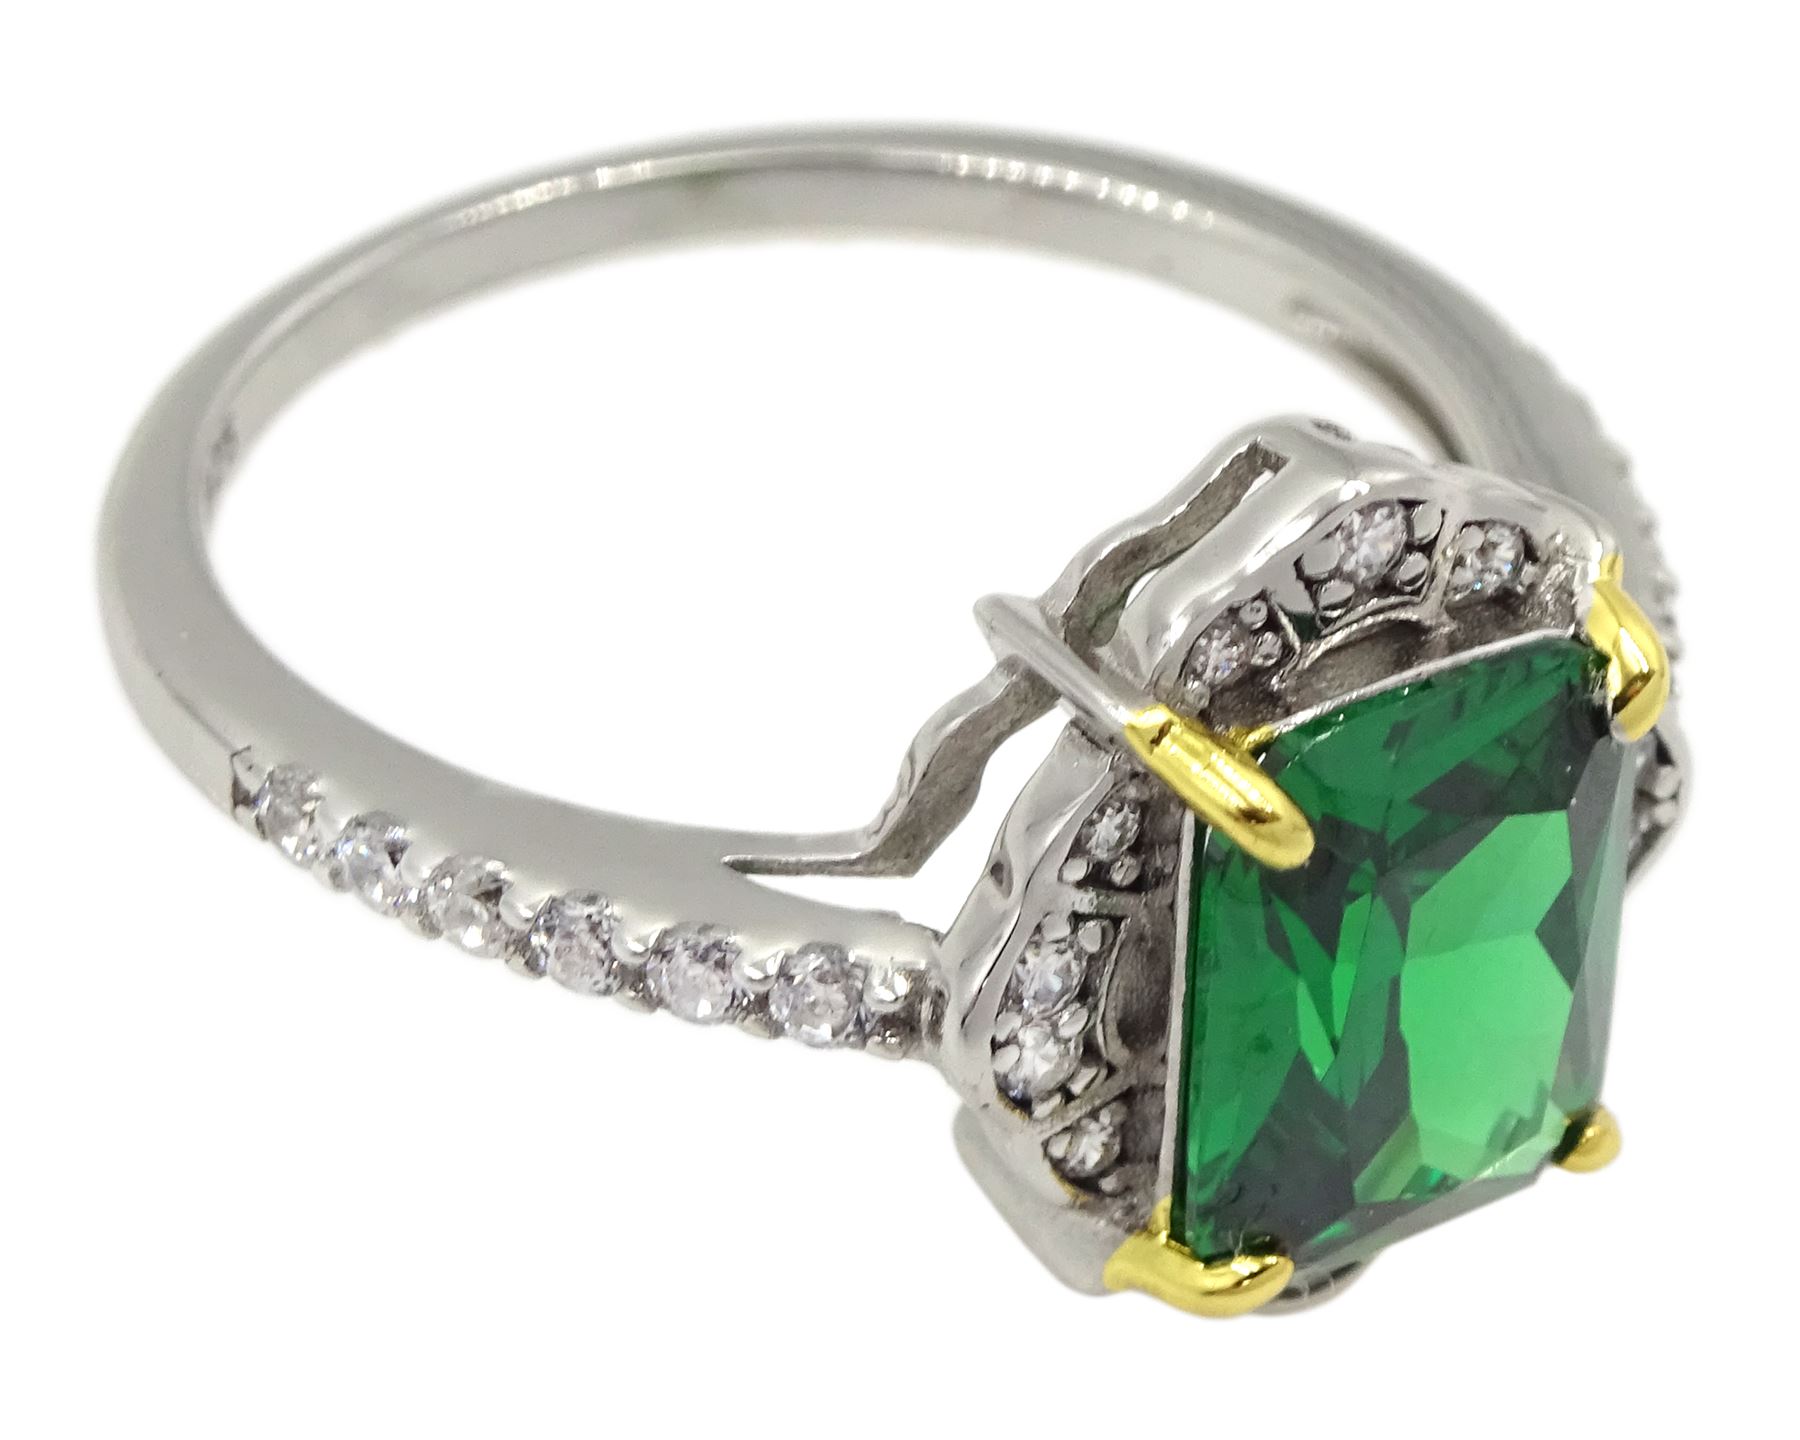 Silver green stone and cubic zirconia cluster ring - Image 3 of 4